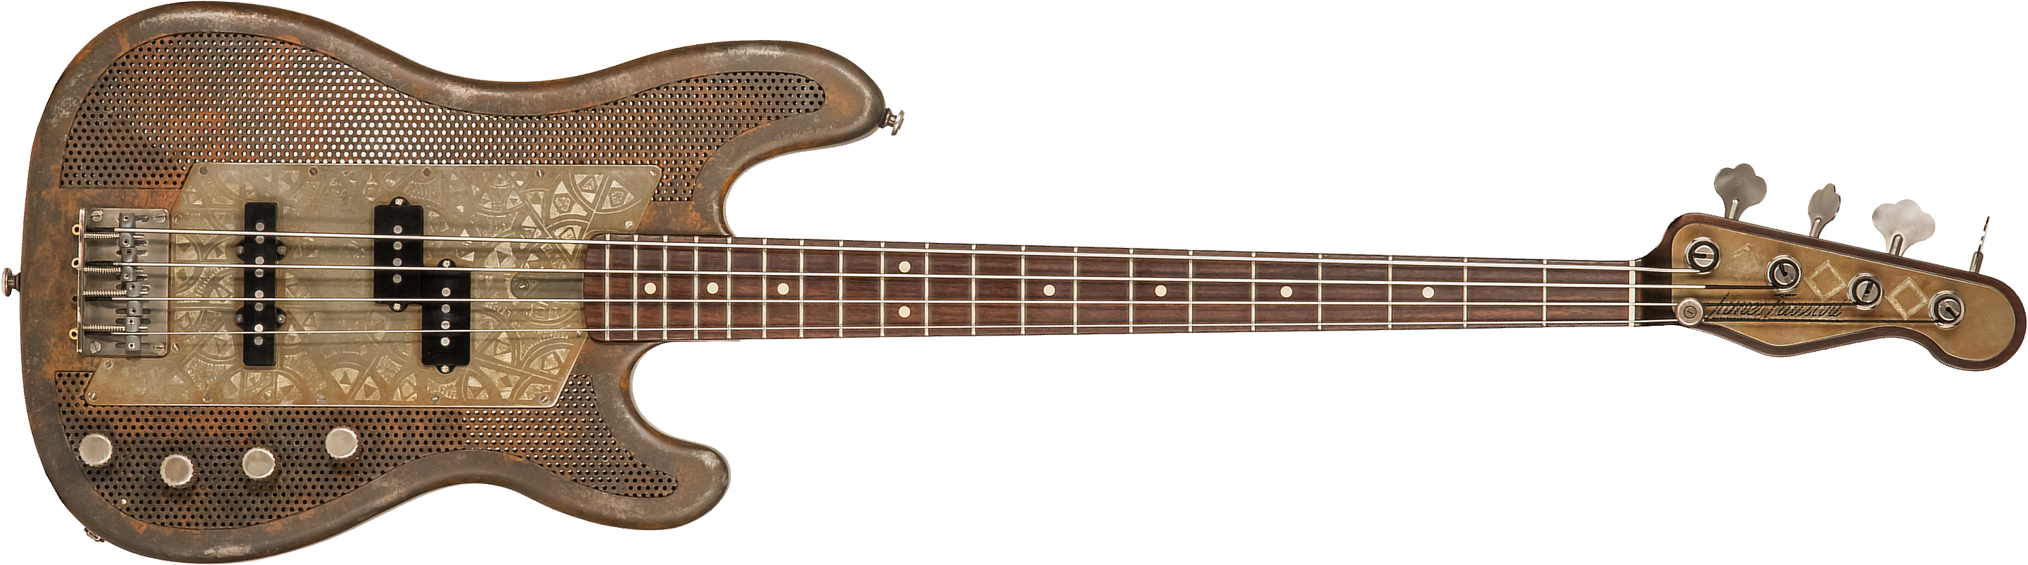 James Trussart Steelcaster Bass Perforated Active Pf #19045 - Rust O Matic African Engraved - Solid body electric bass - Main picture